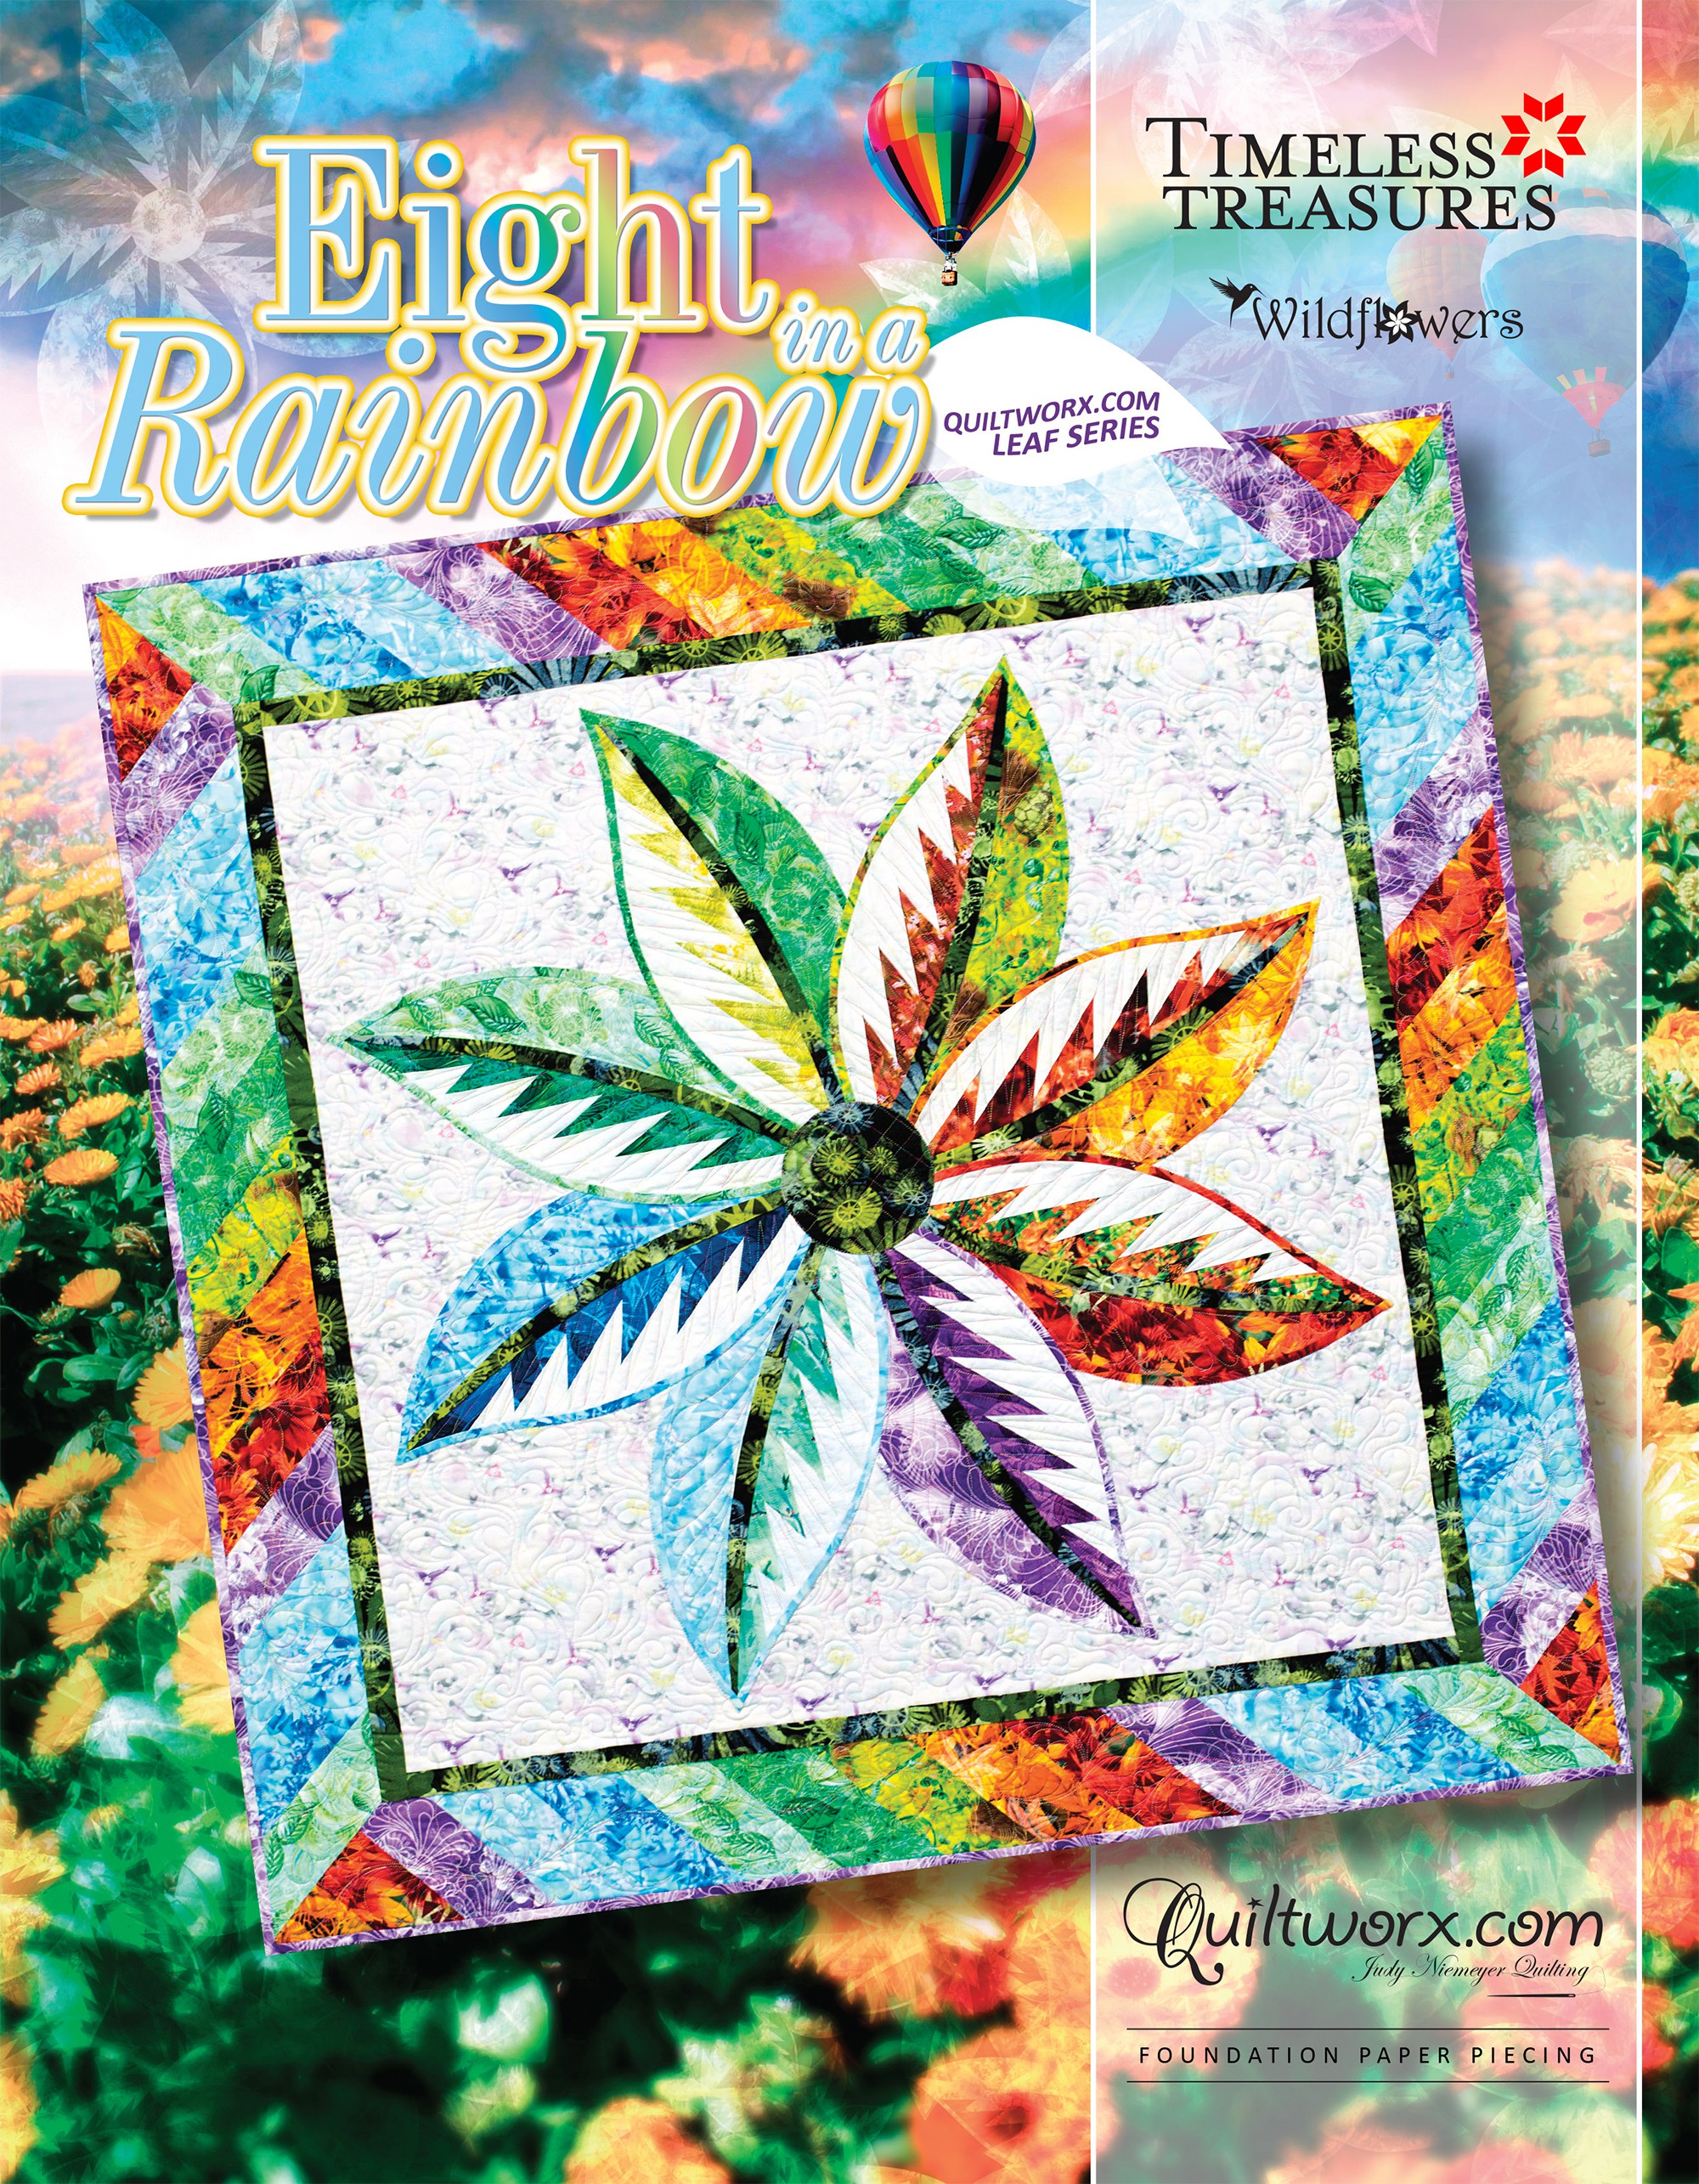 New Quiltworx Stained Glass Window Quilt Pattern and Piecing Papers 